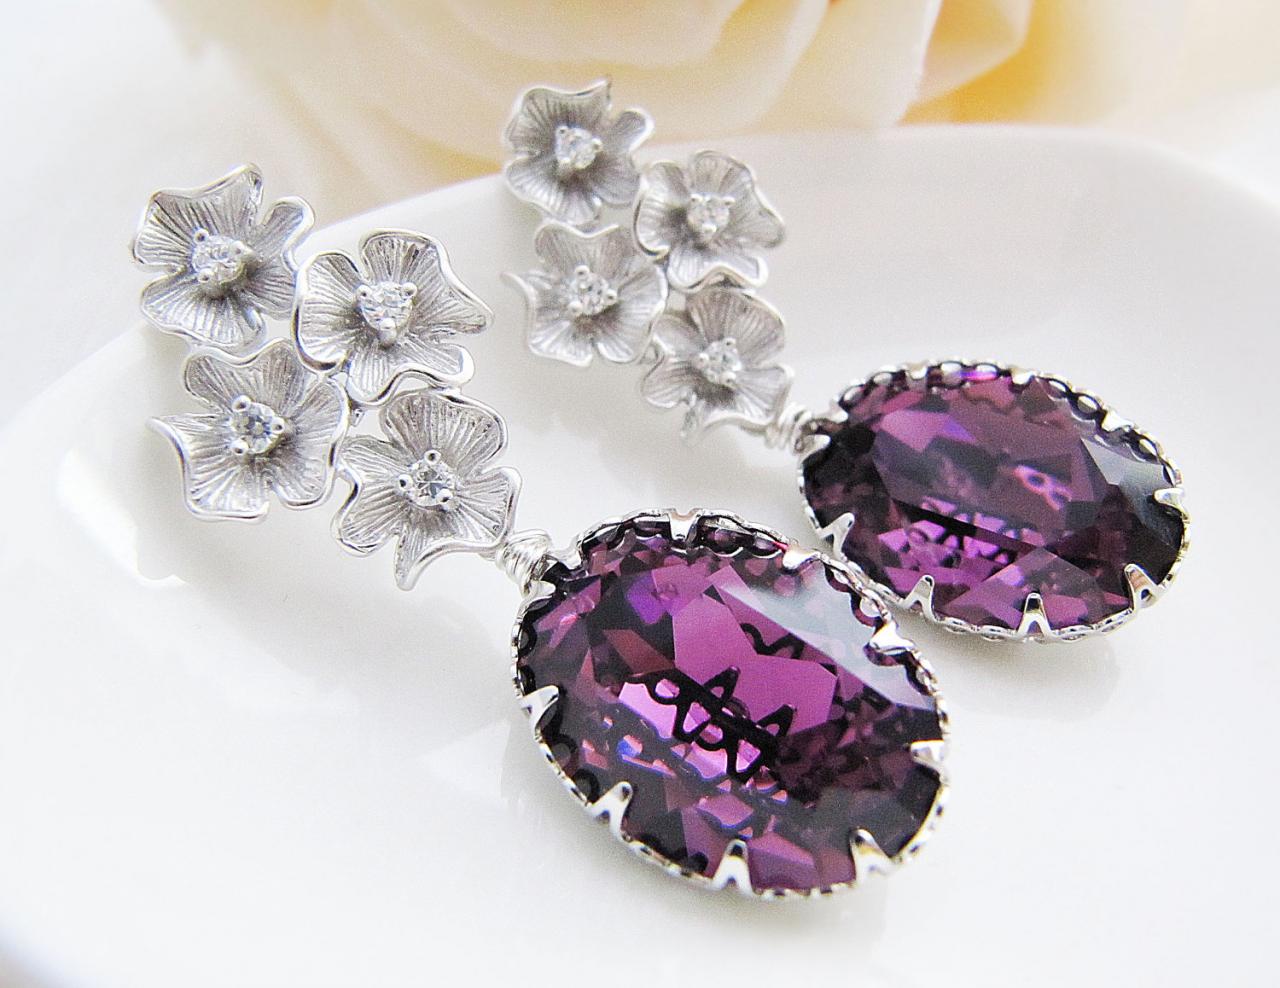 Bridal Earrings Matte Rodium Flower With Cubic Zirconia Ear Posts And Amethyst Swarovski Crystal Oval Drops